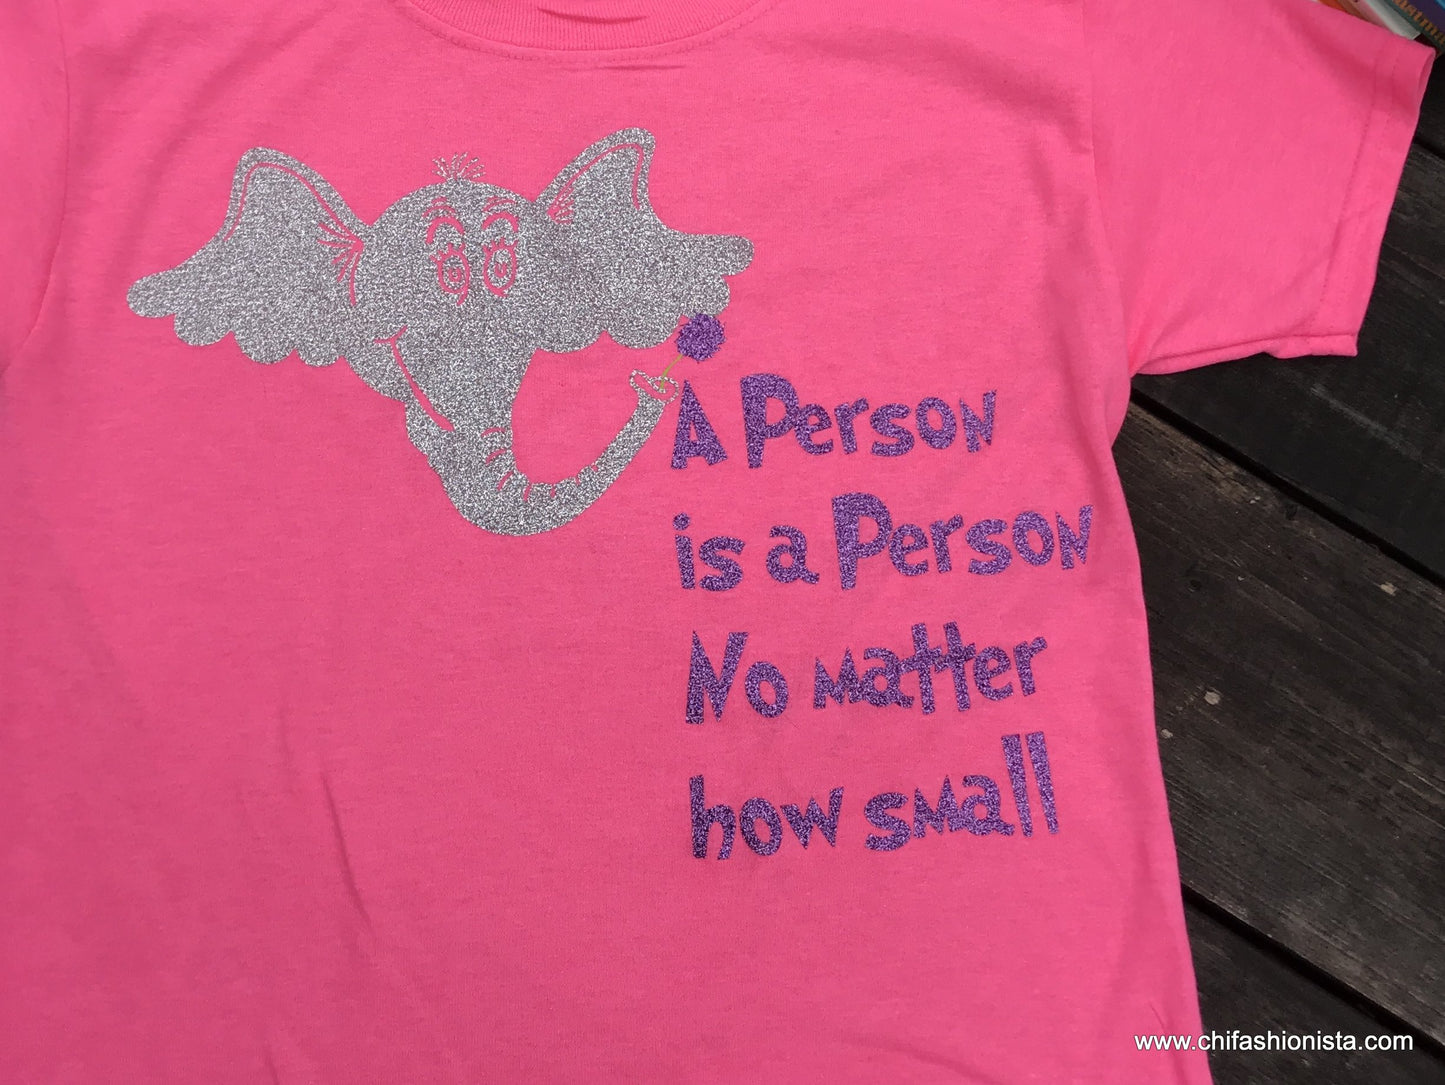 A Person is a person-Suess